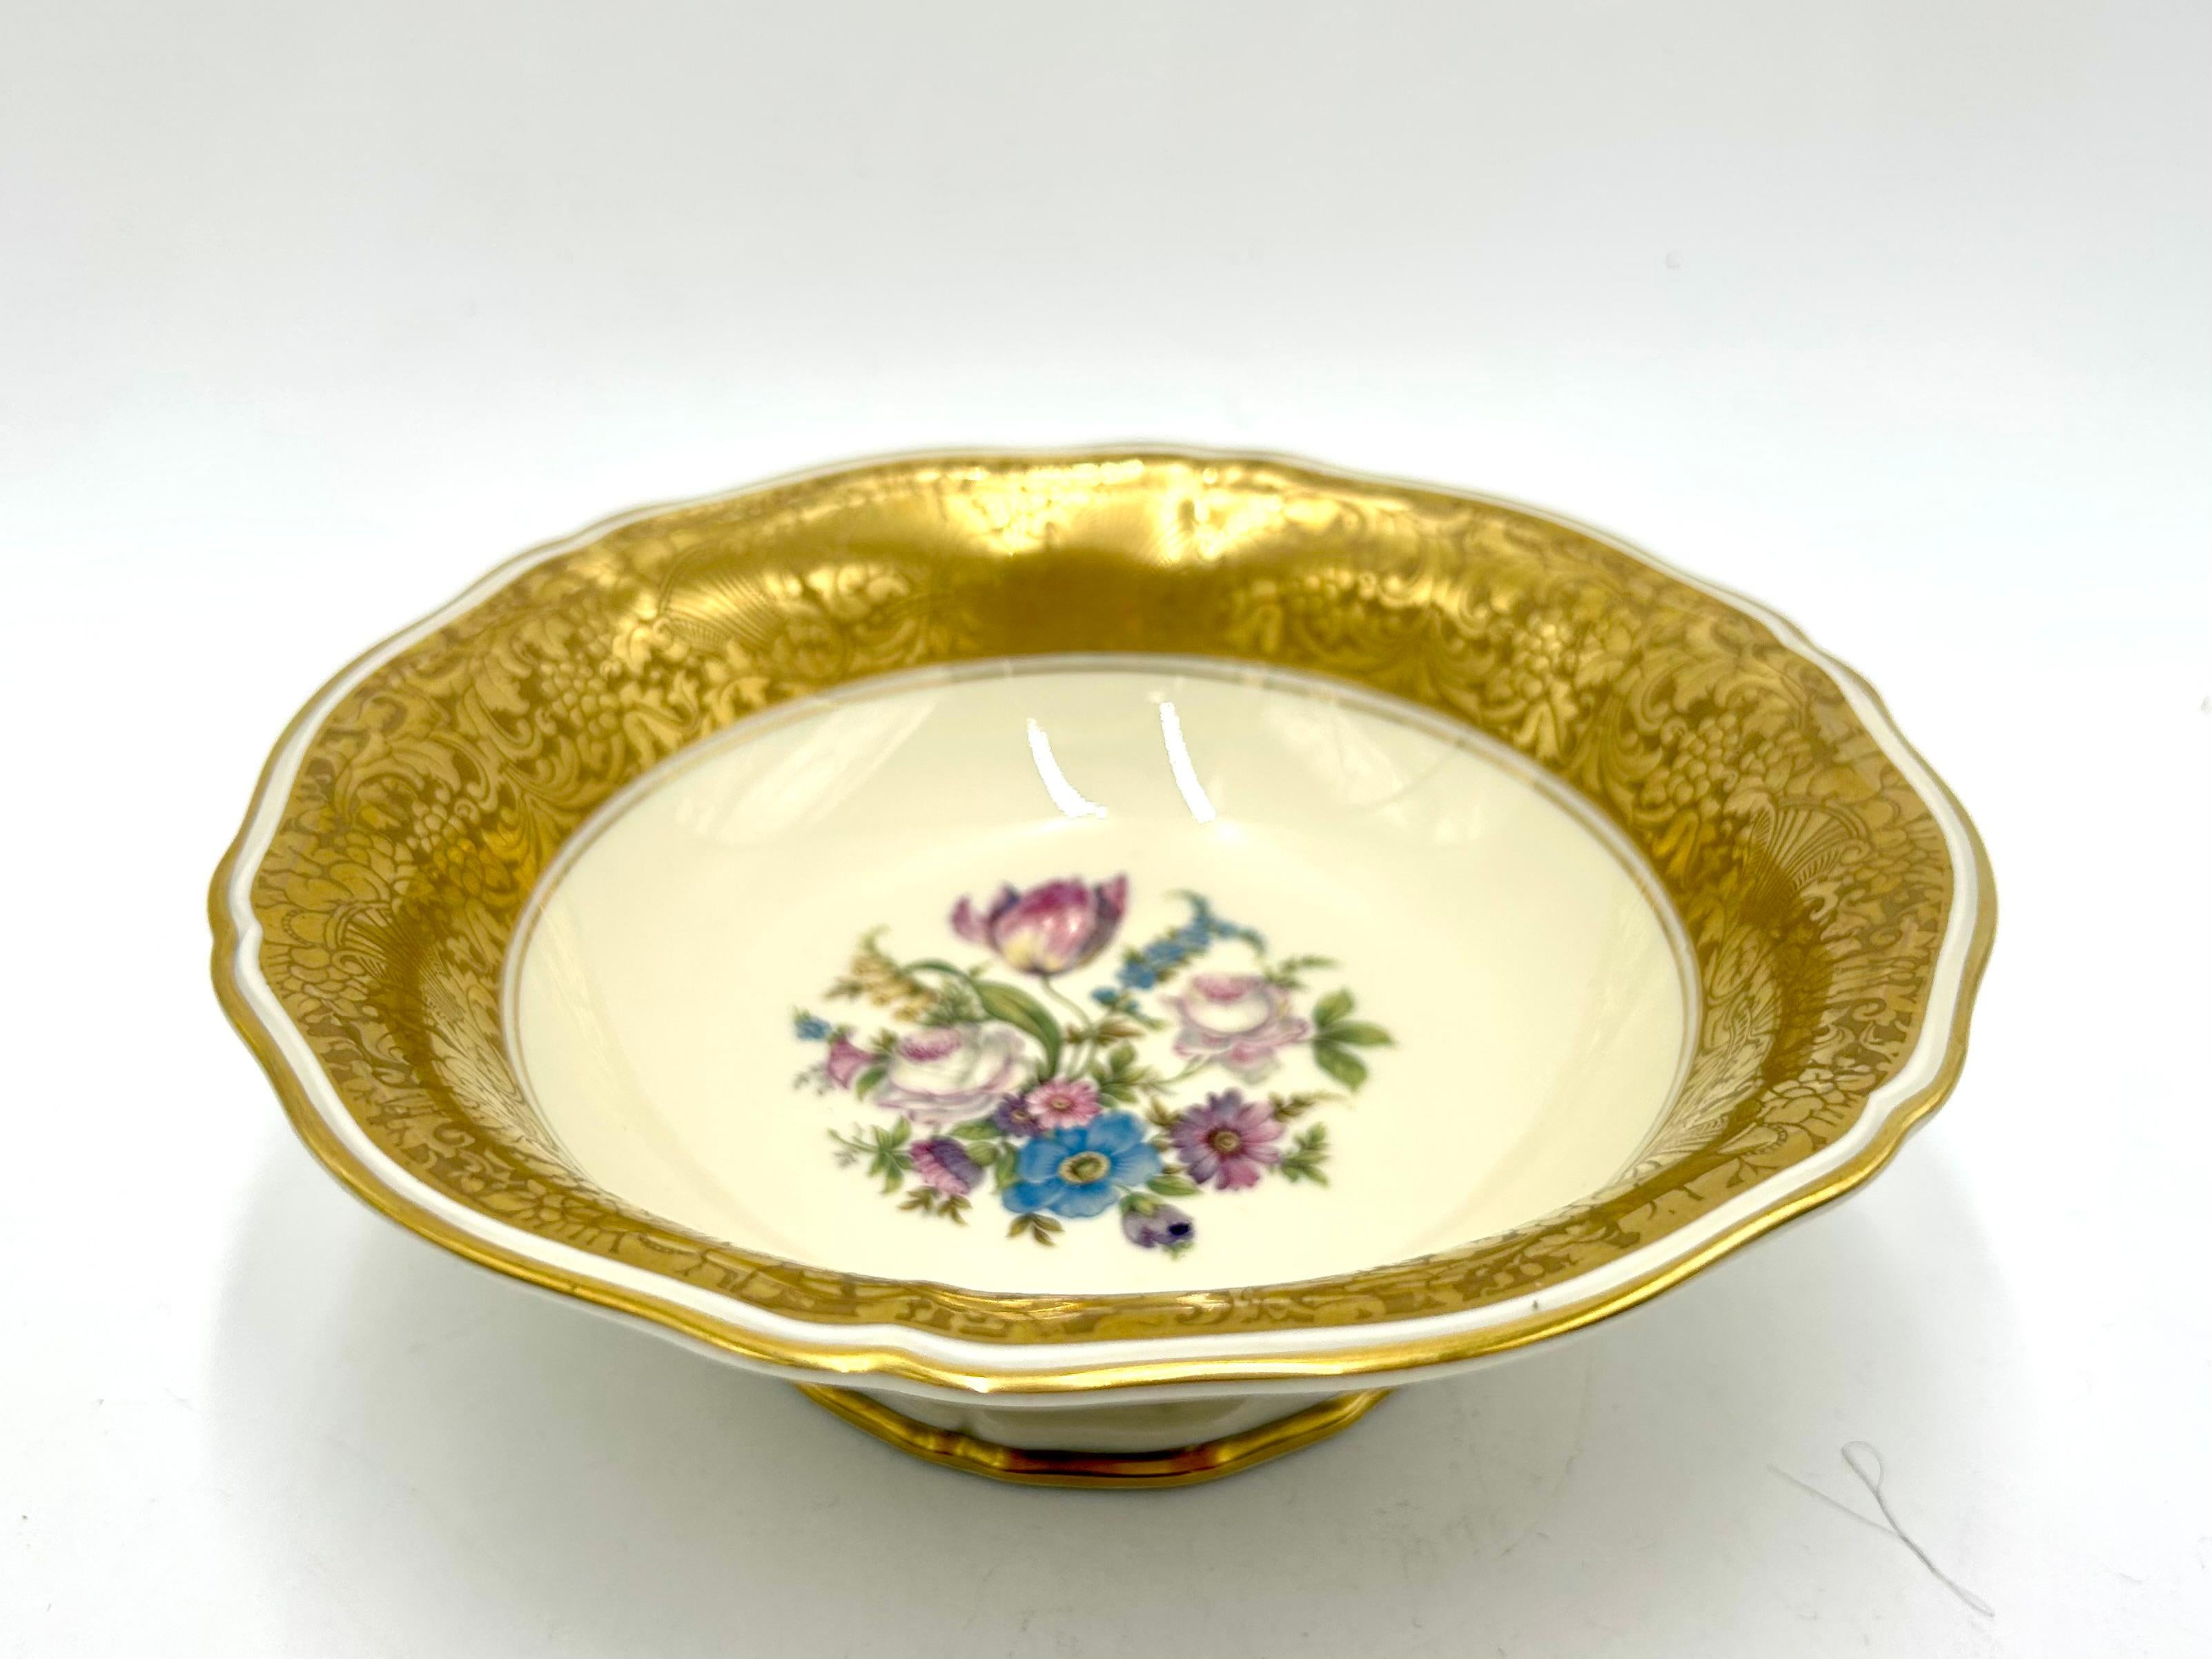 Beautiful porcelain platter-bowl in ecru color decorated with gilding and a floral motif
A product of the valued German manufacturer Rosenthal, signed with the mark used in the years 1942-1948.
A platter from the classic, beautiful Chippendale